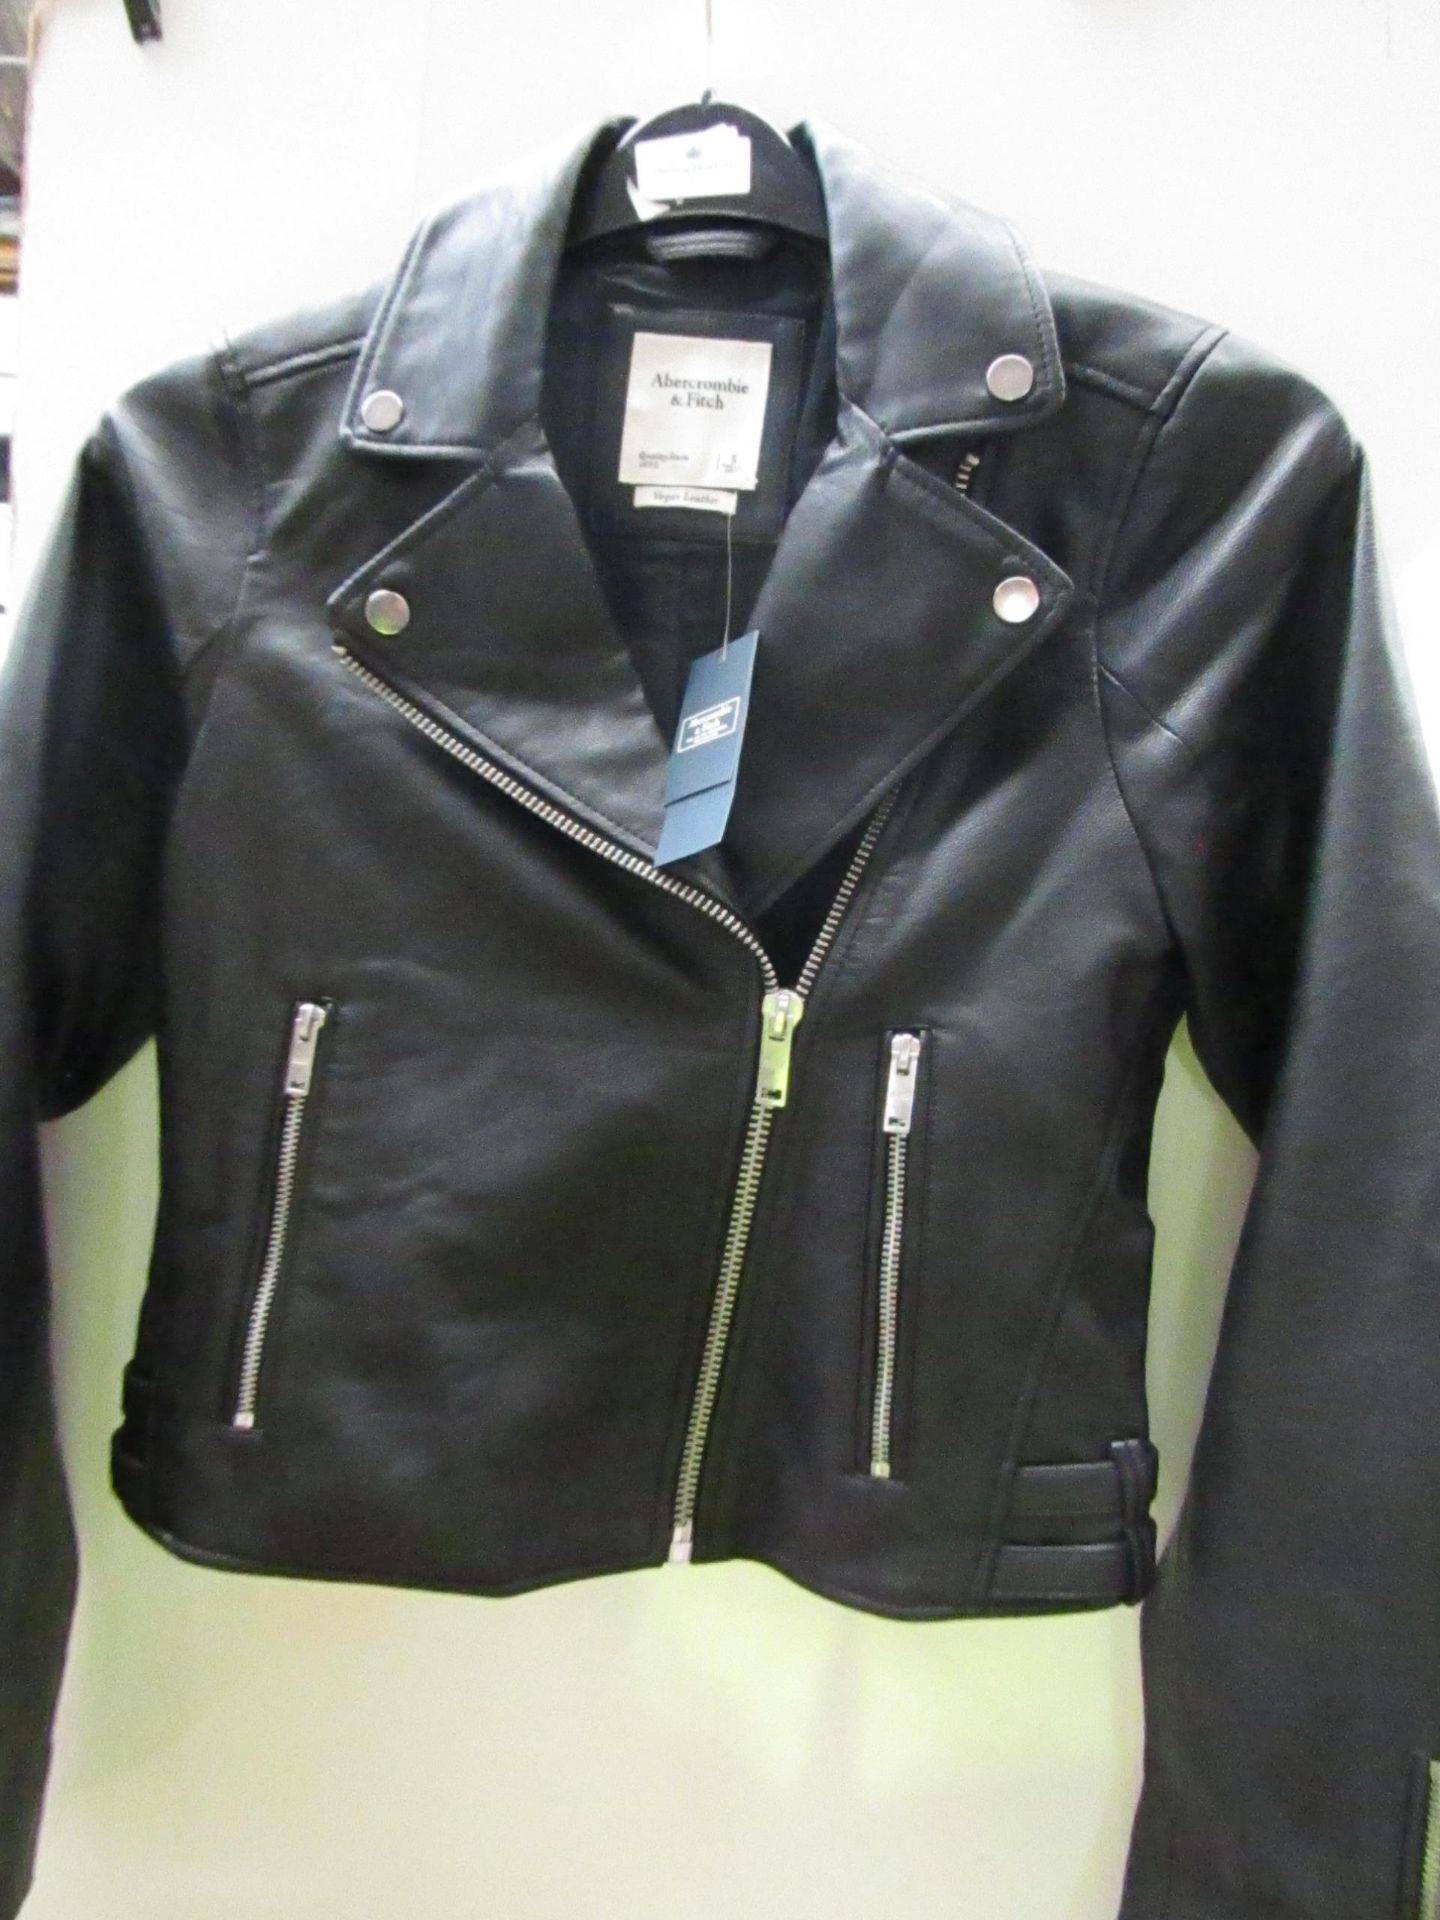 No VAT !!..Abercrombie & Fitch Vegan Leather Jacket Ladies Size S Black New With Tags RRP £100